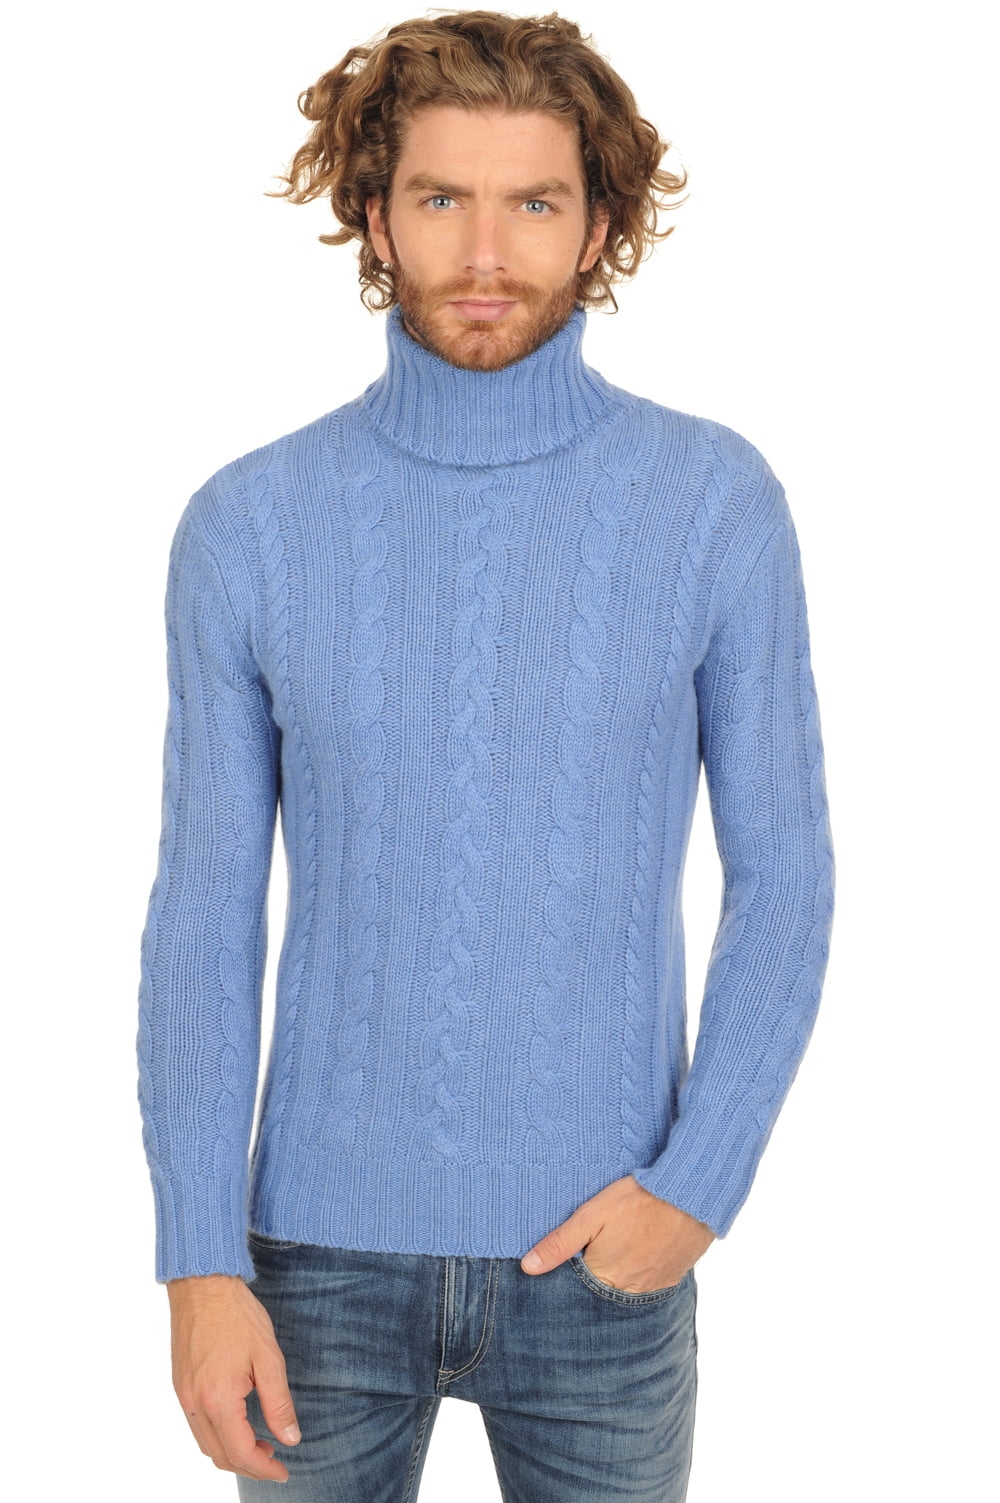 Cachemire pull homme lucas bleu chine s